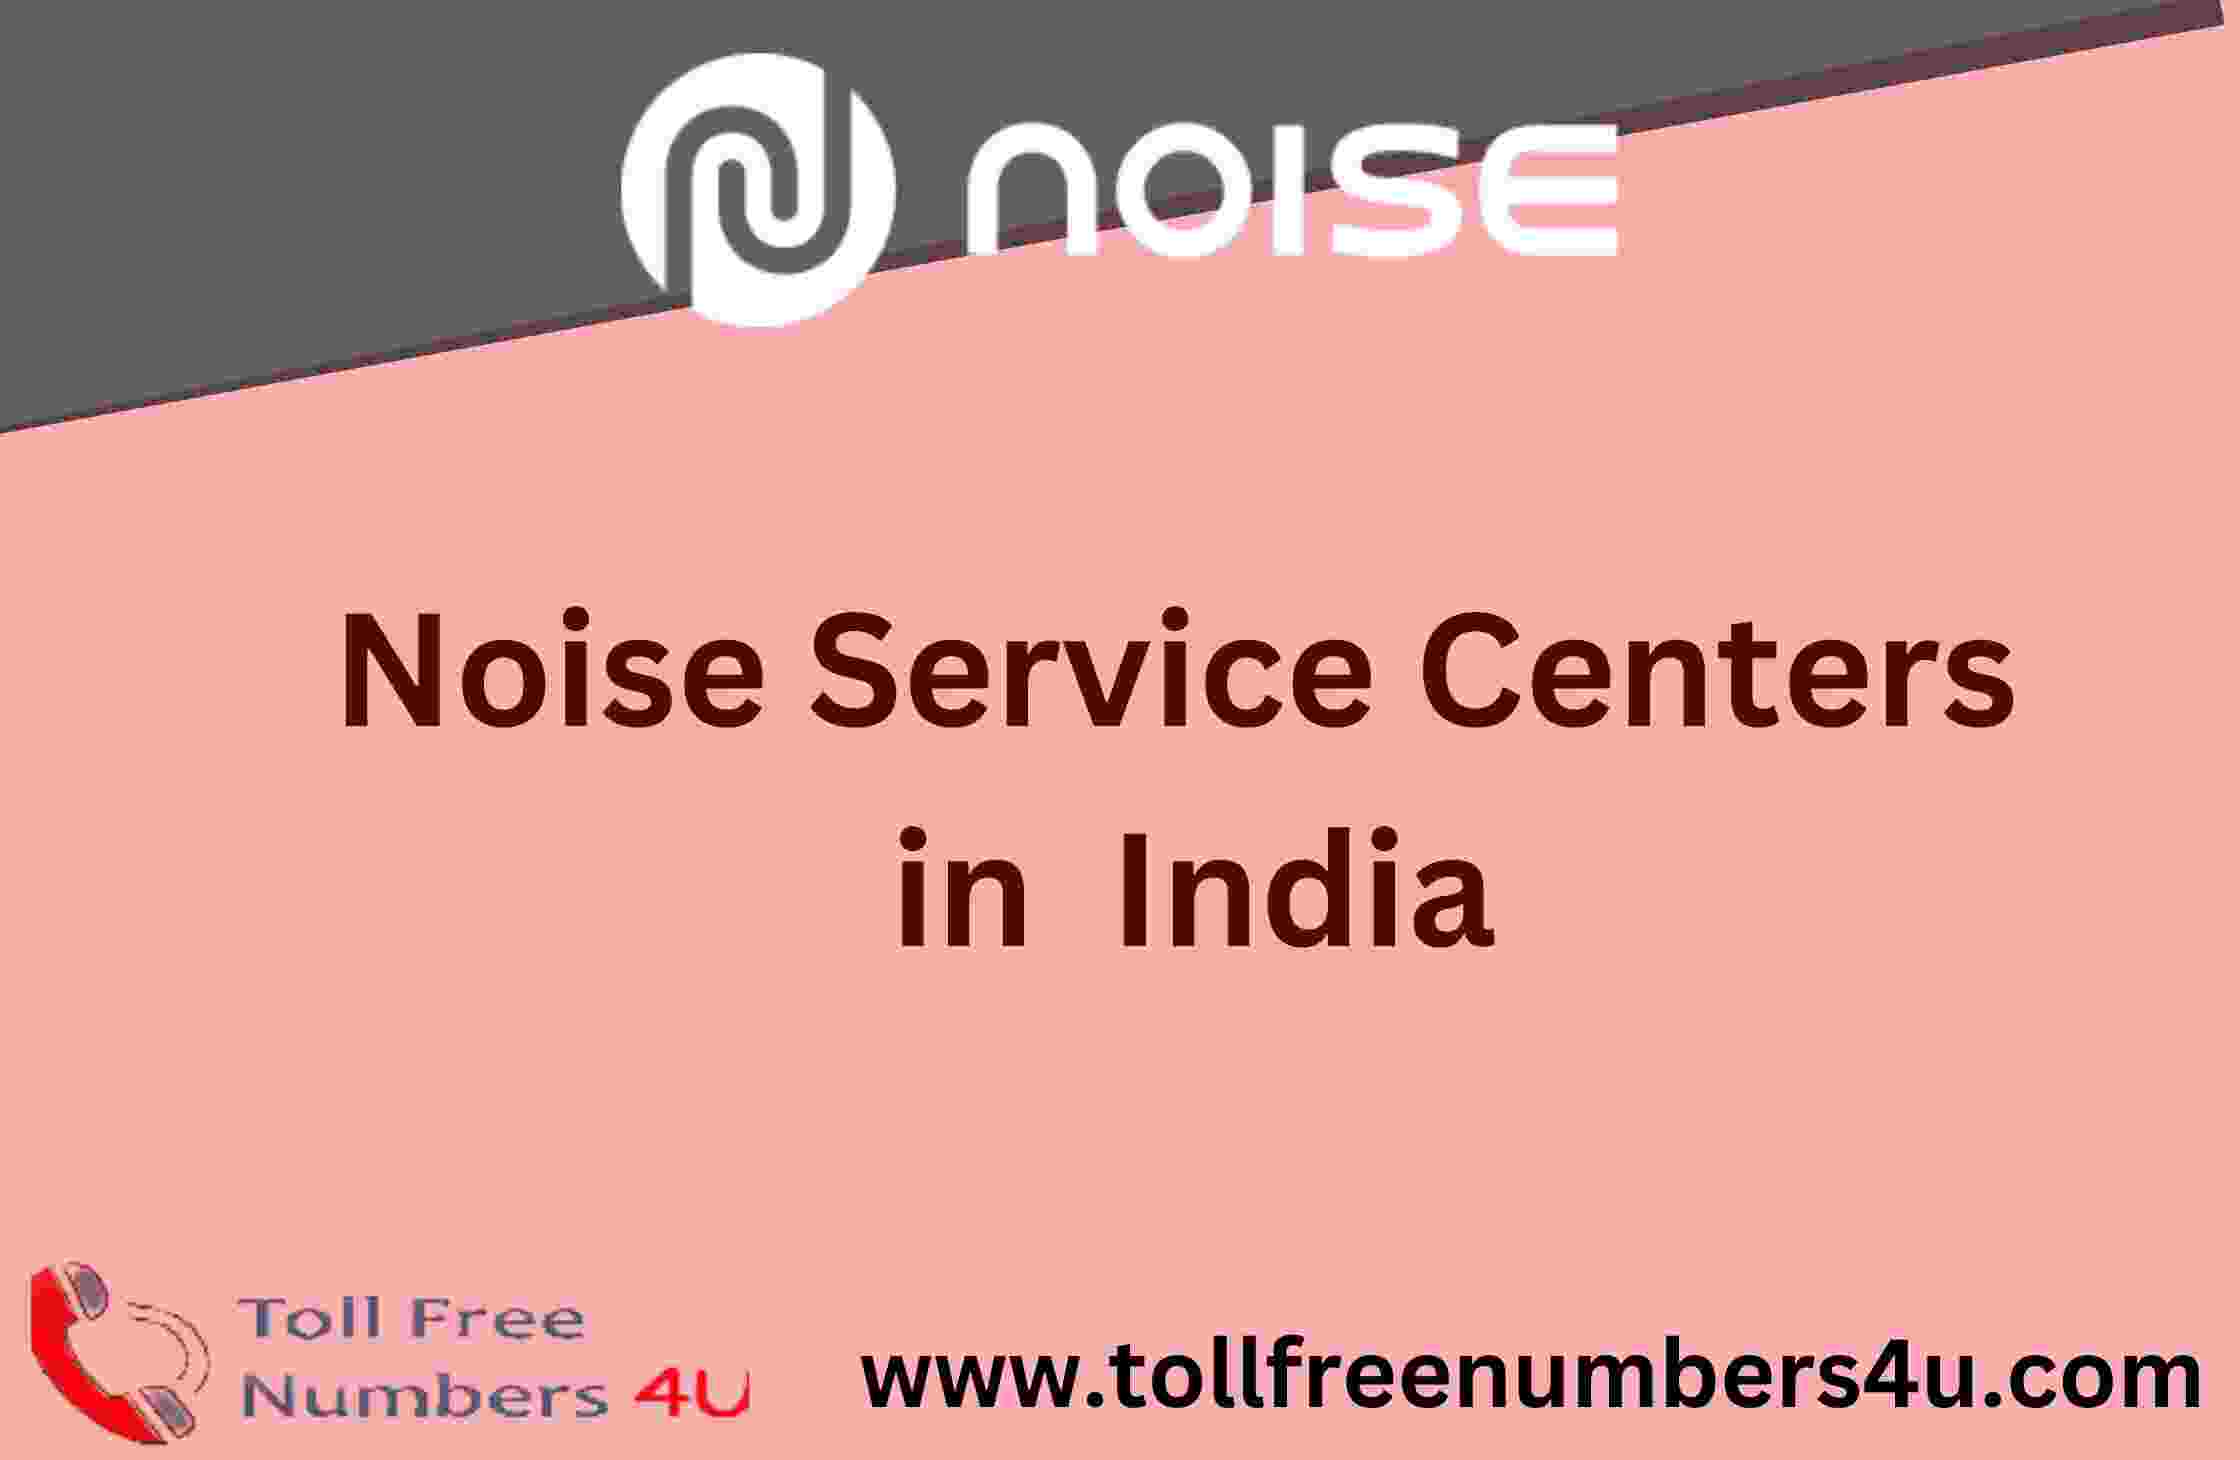 Noise service center in India - TollfreeNumbers4u